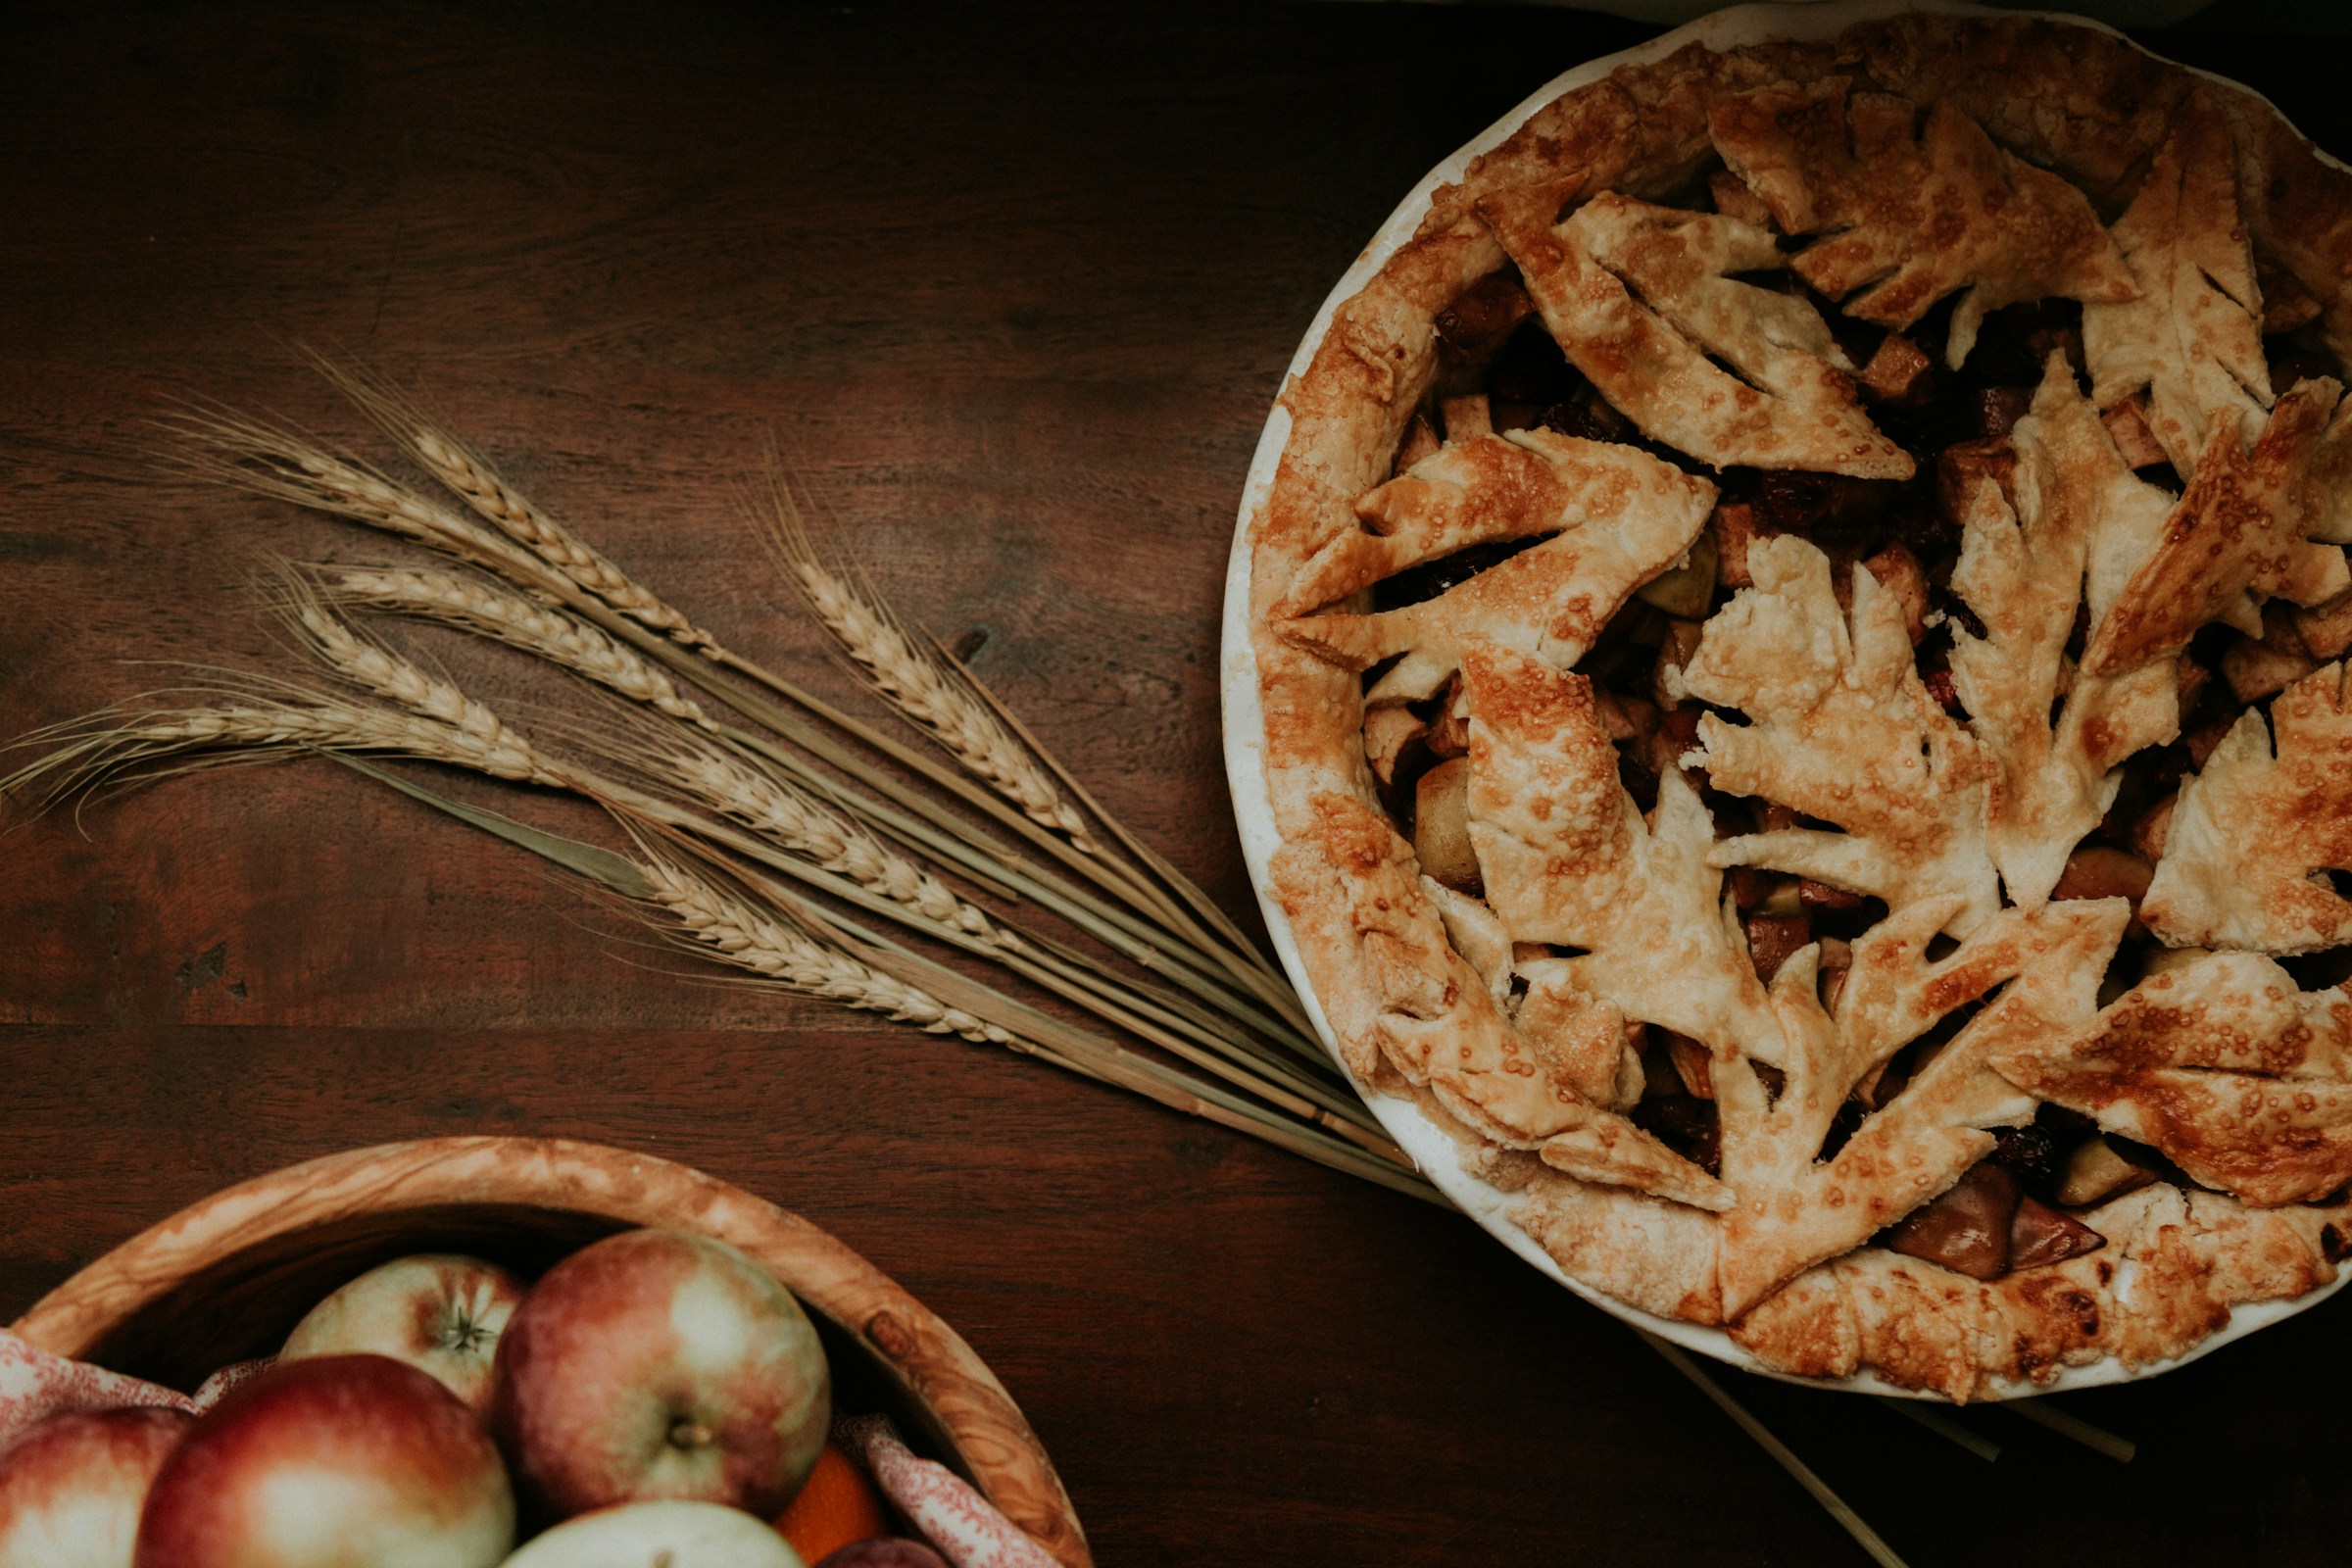 Image of an apple pie next to wheat for the post "Is Gluten-Free Wheat Starch Celiac-Safe".